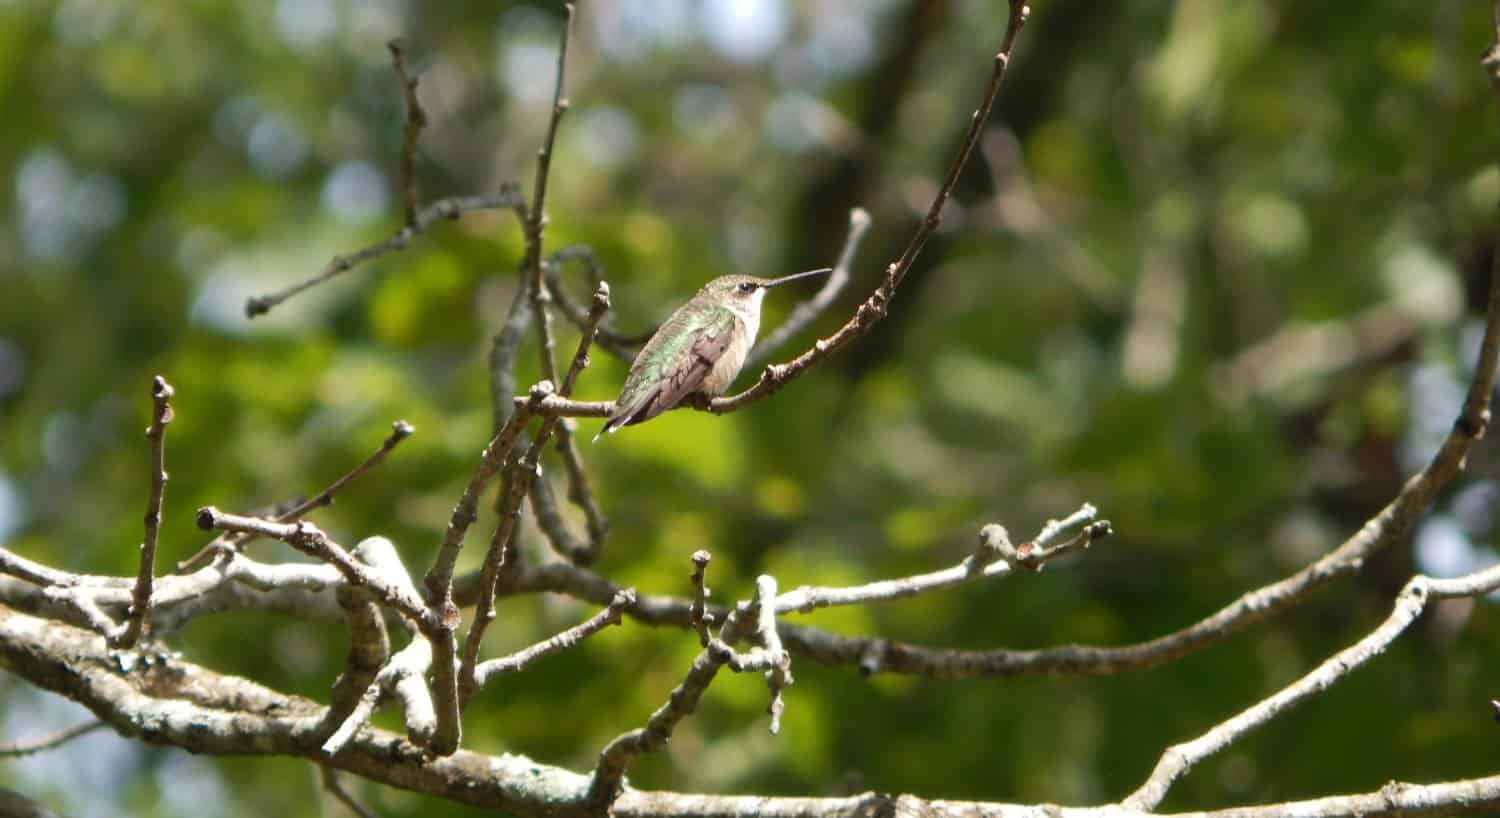 Close up view of a light brown and green bird with long beak stting on a branch in a tree